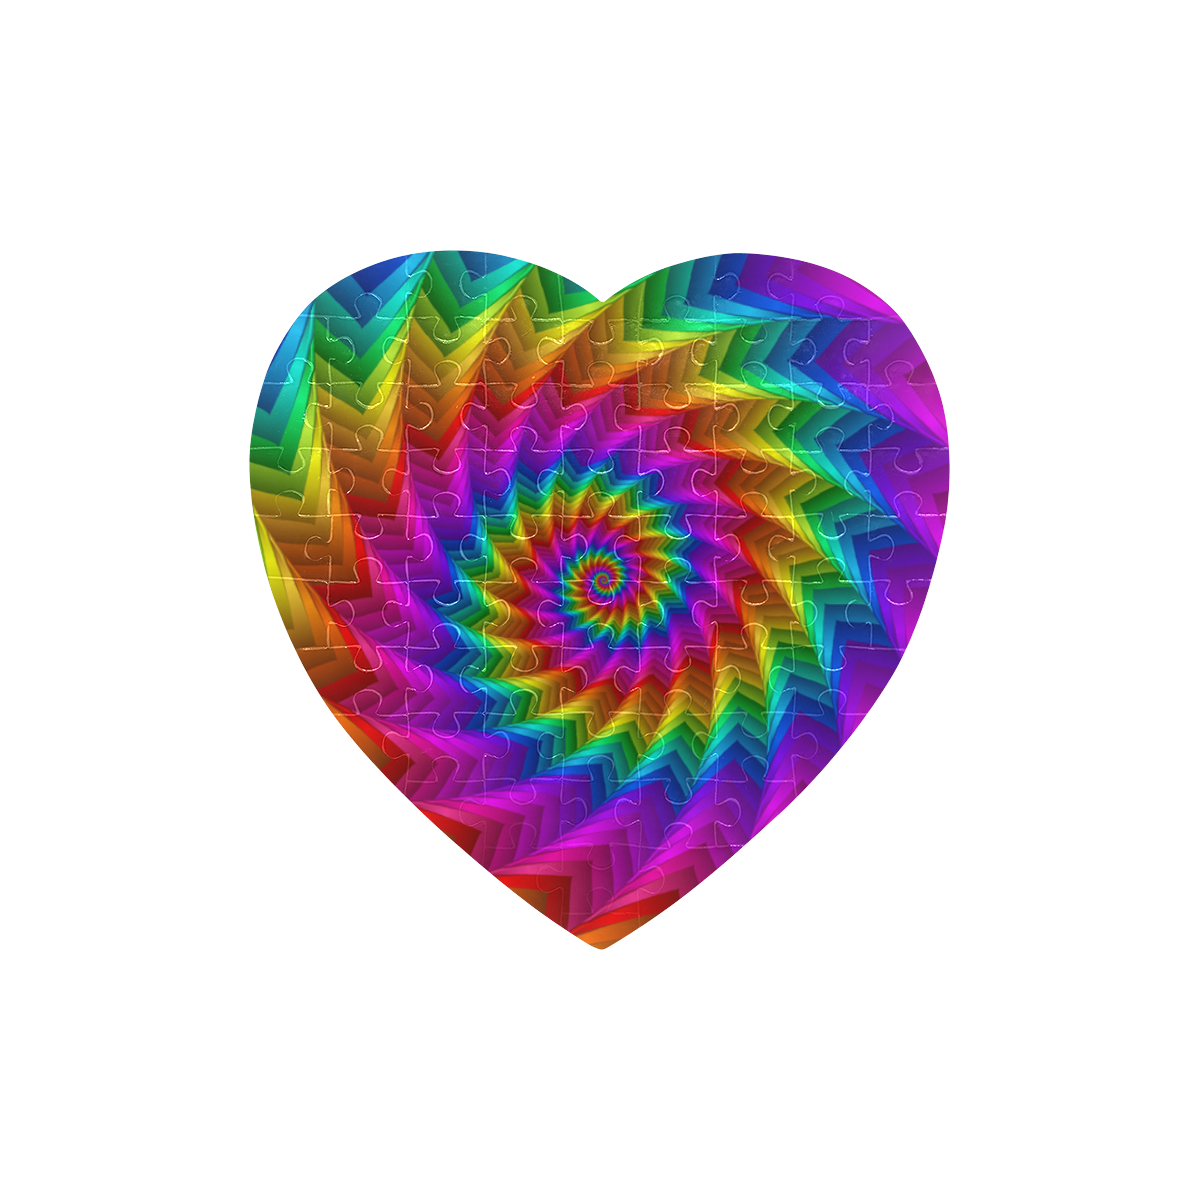 Psychedelic Rainbow Spiral Heart Puzzle Heart-Shaped Jigsaw Puzzle (Set of 75 Pieces)